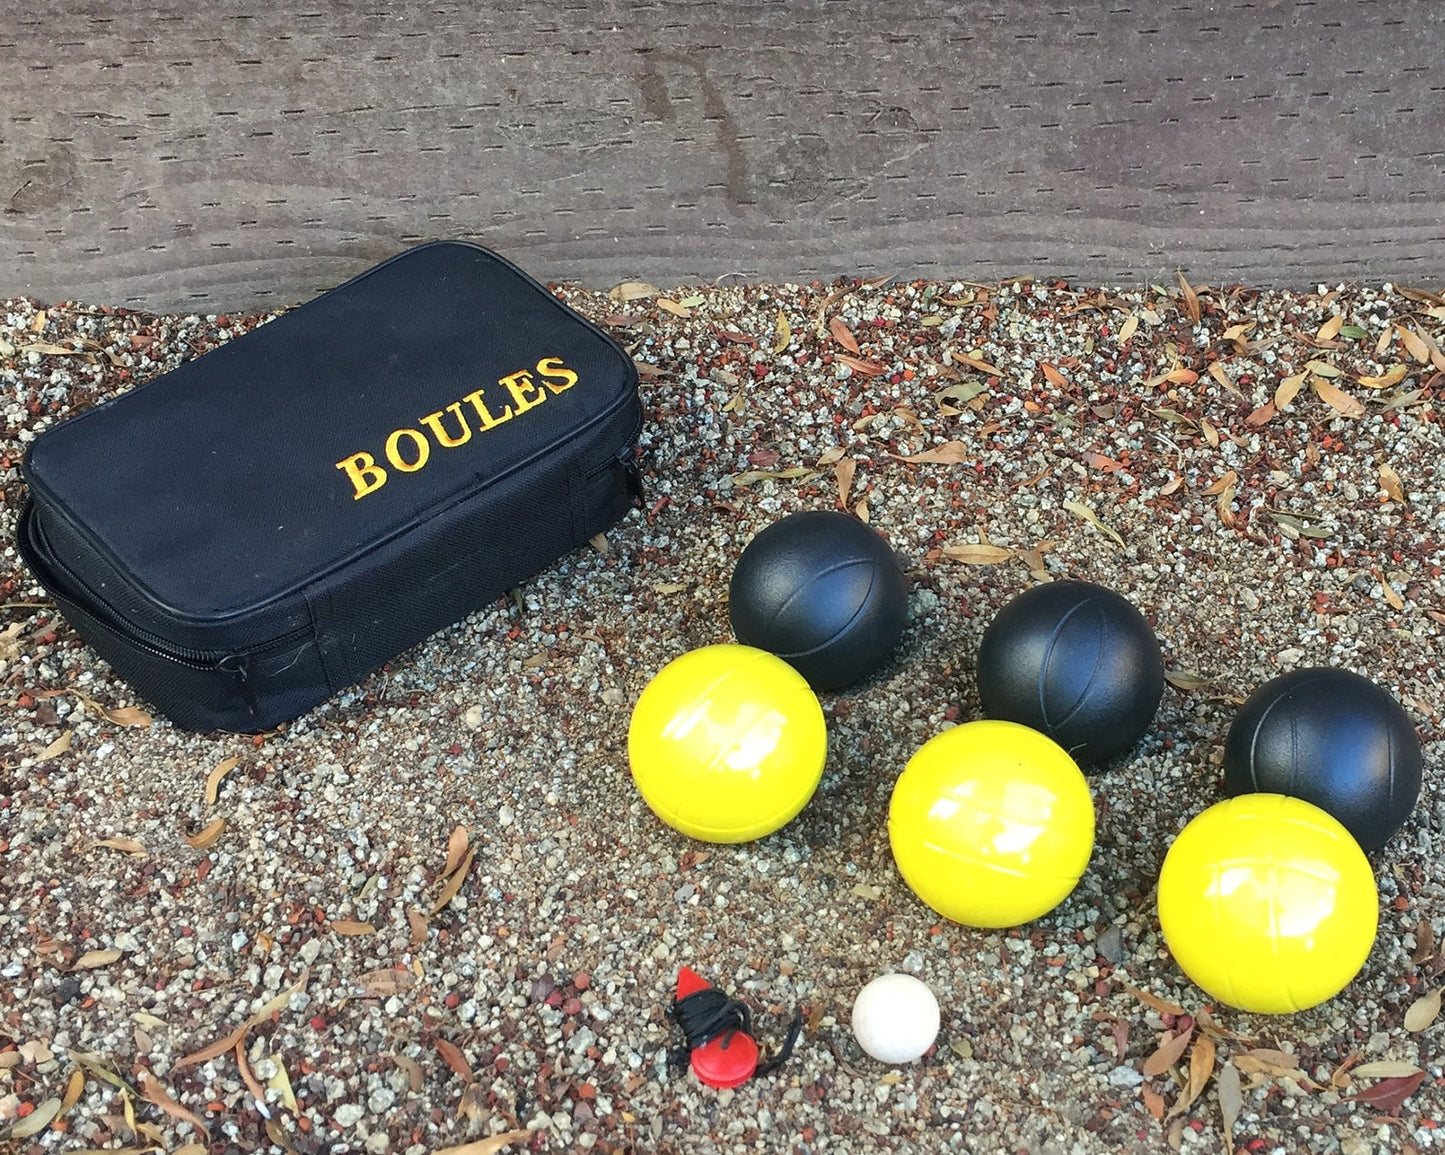 73mm Metal Boules Set with 6 Black and Yellow Balls and Black Bag